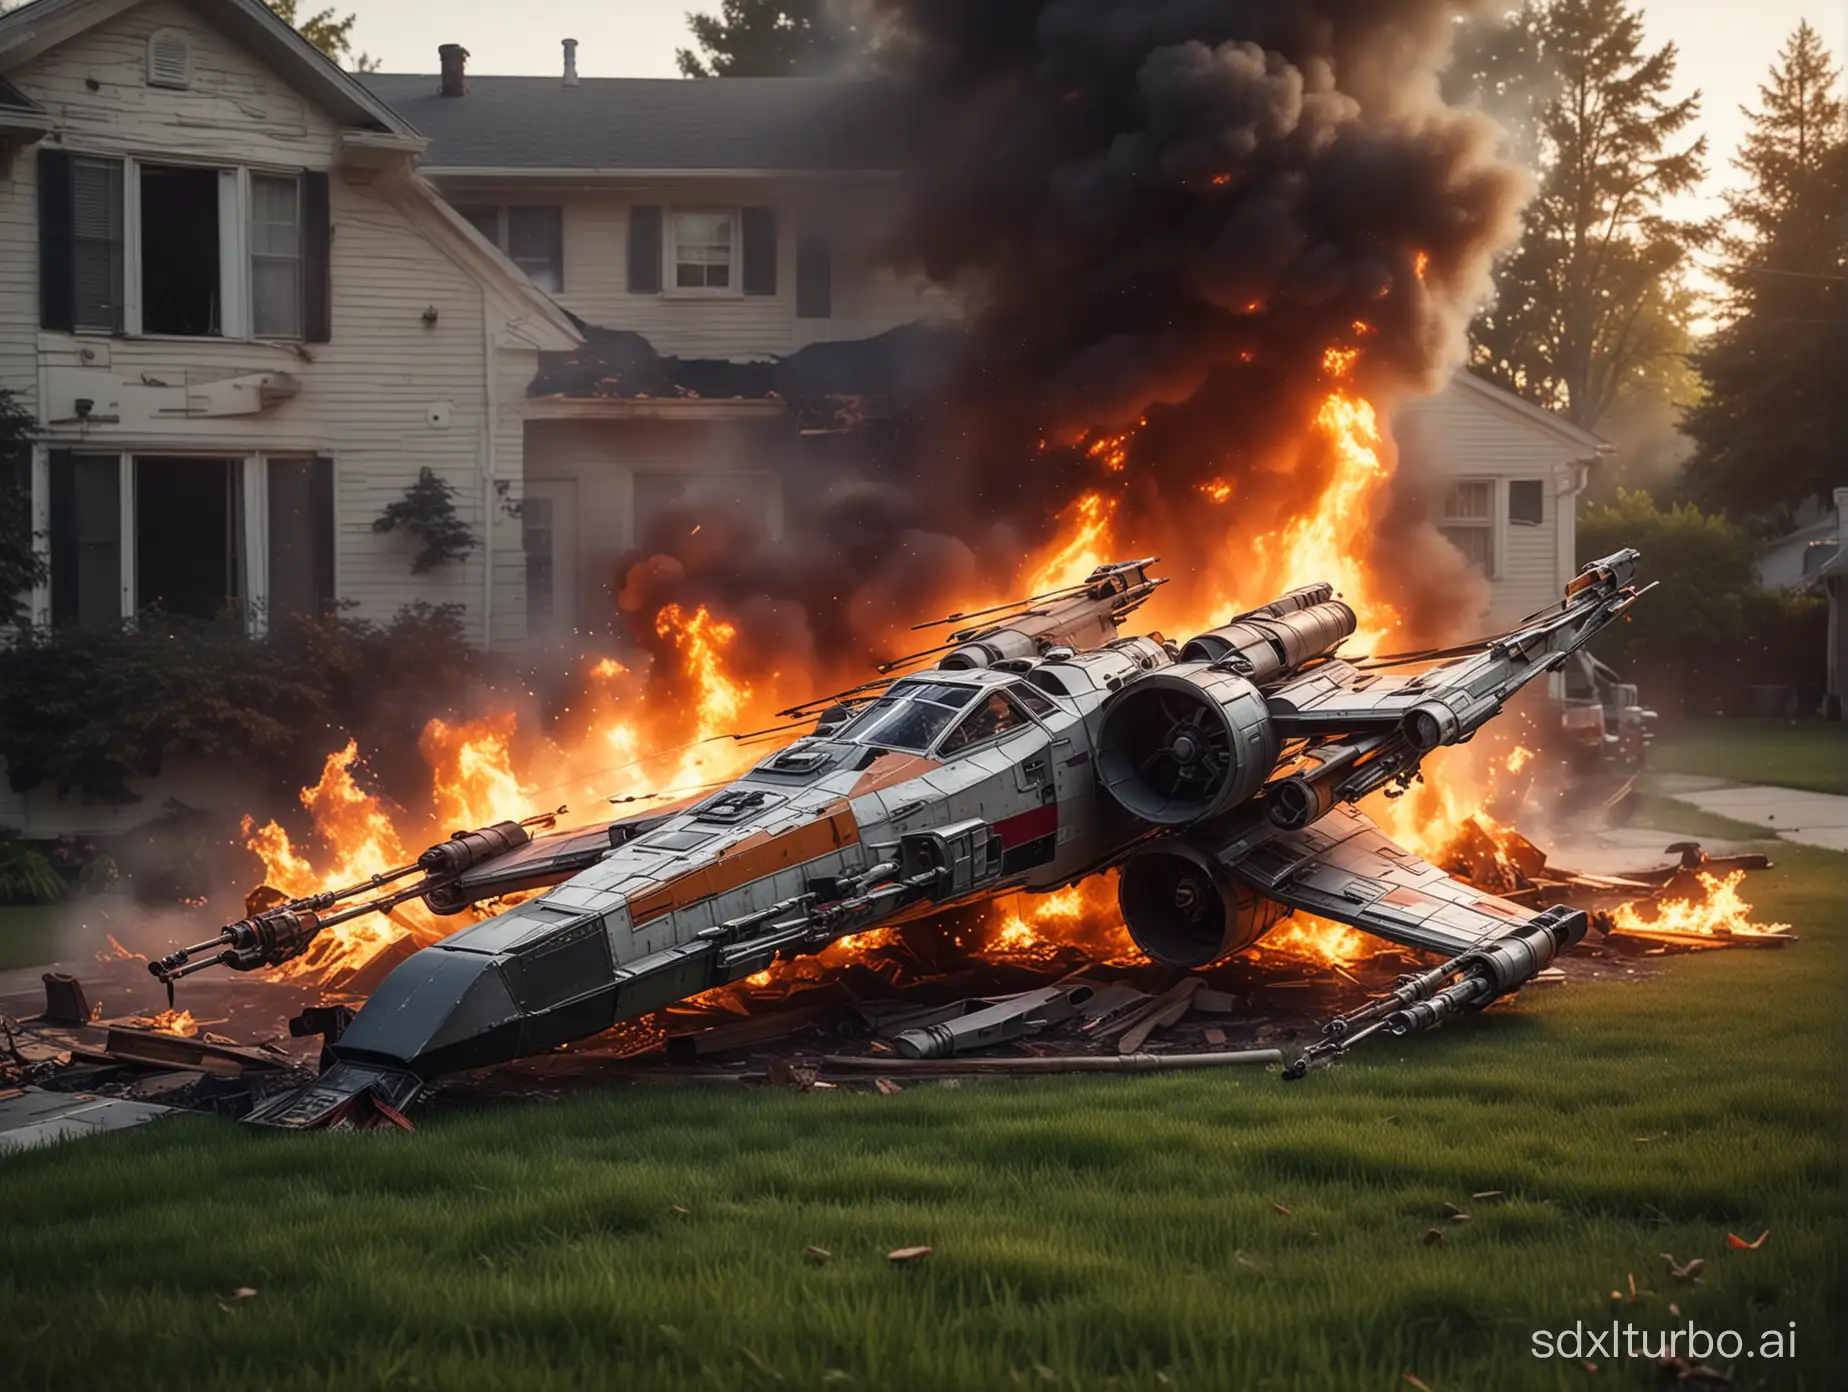 (x-wing spacecraft) (((crashed))) (on fire) on the front lawn of an American suburban house. Cinematic style